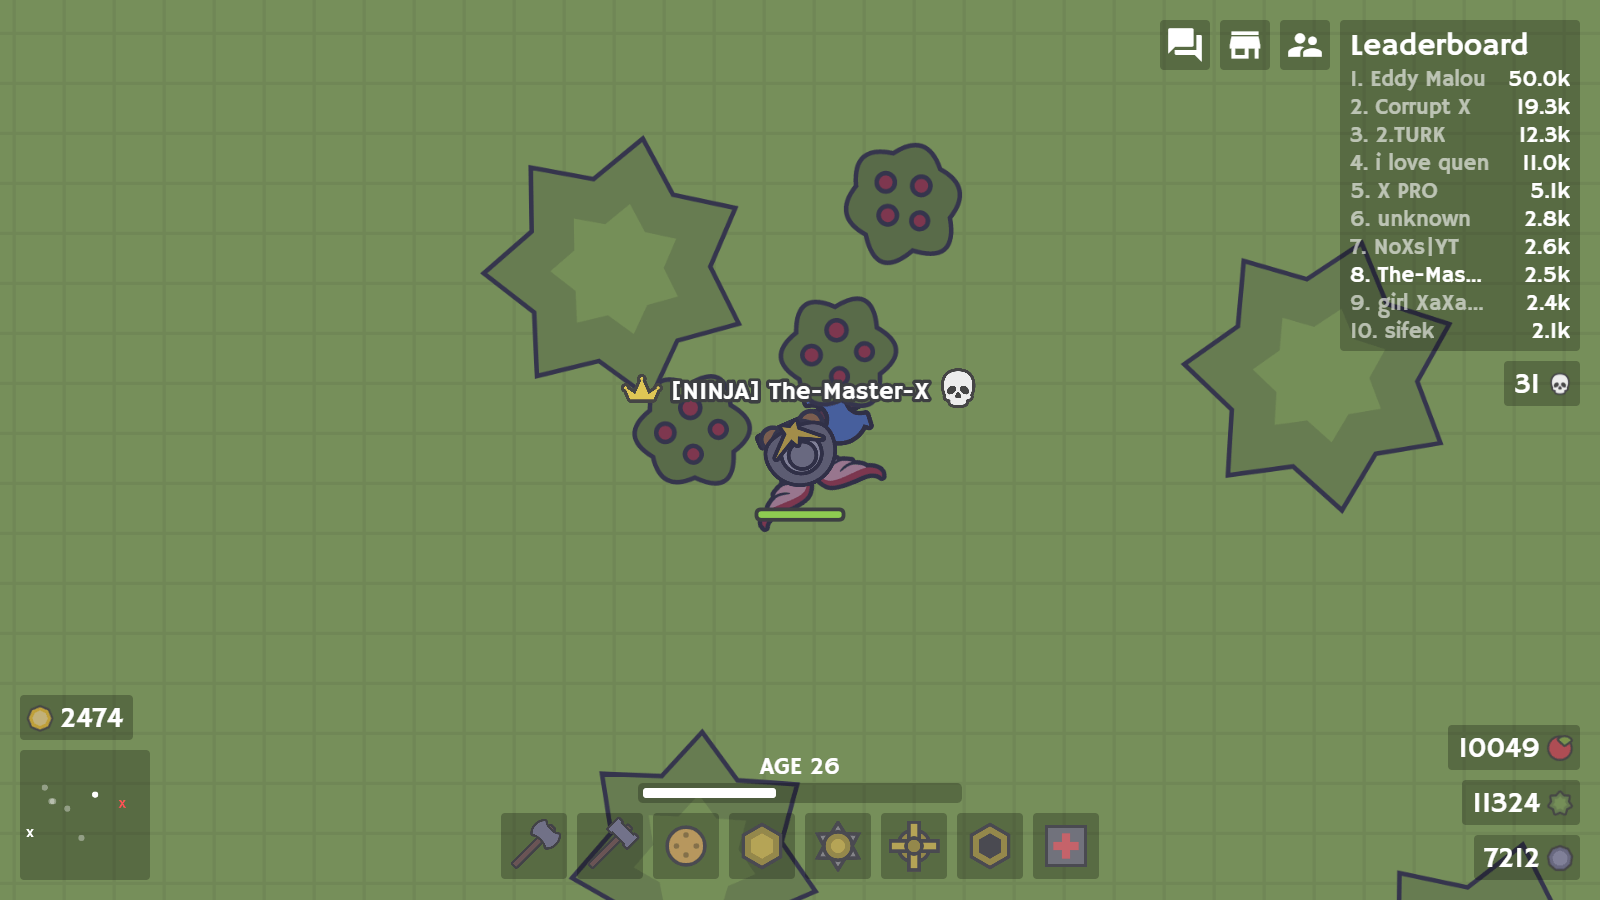 A moomoo.io score with a great build. I haven't played in a while